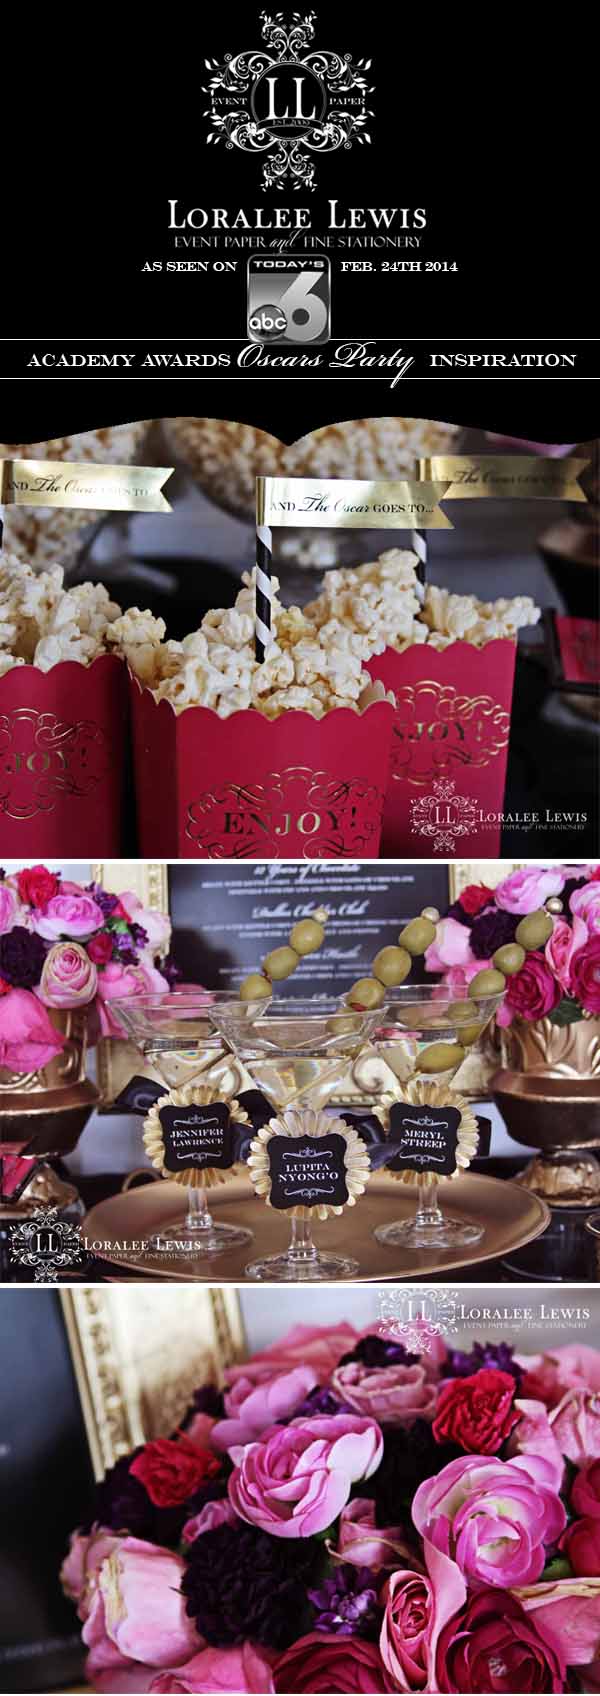 Styling and Event Paper Products by Loralee Lewis, www.LoraleeLewis.com